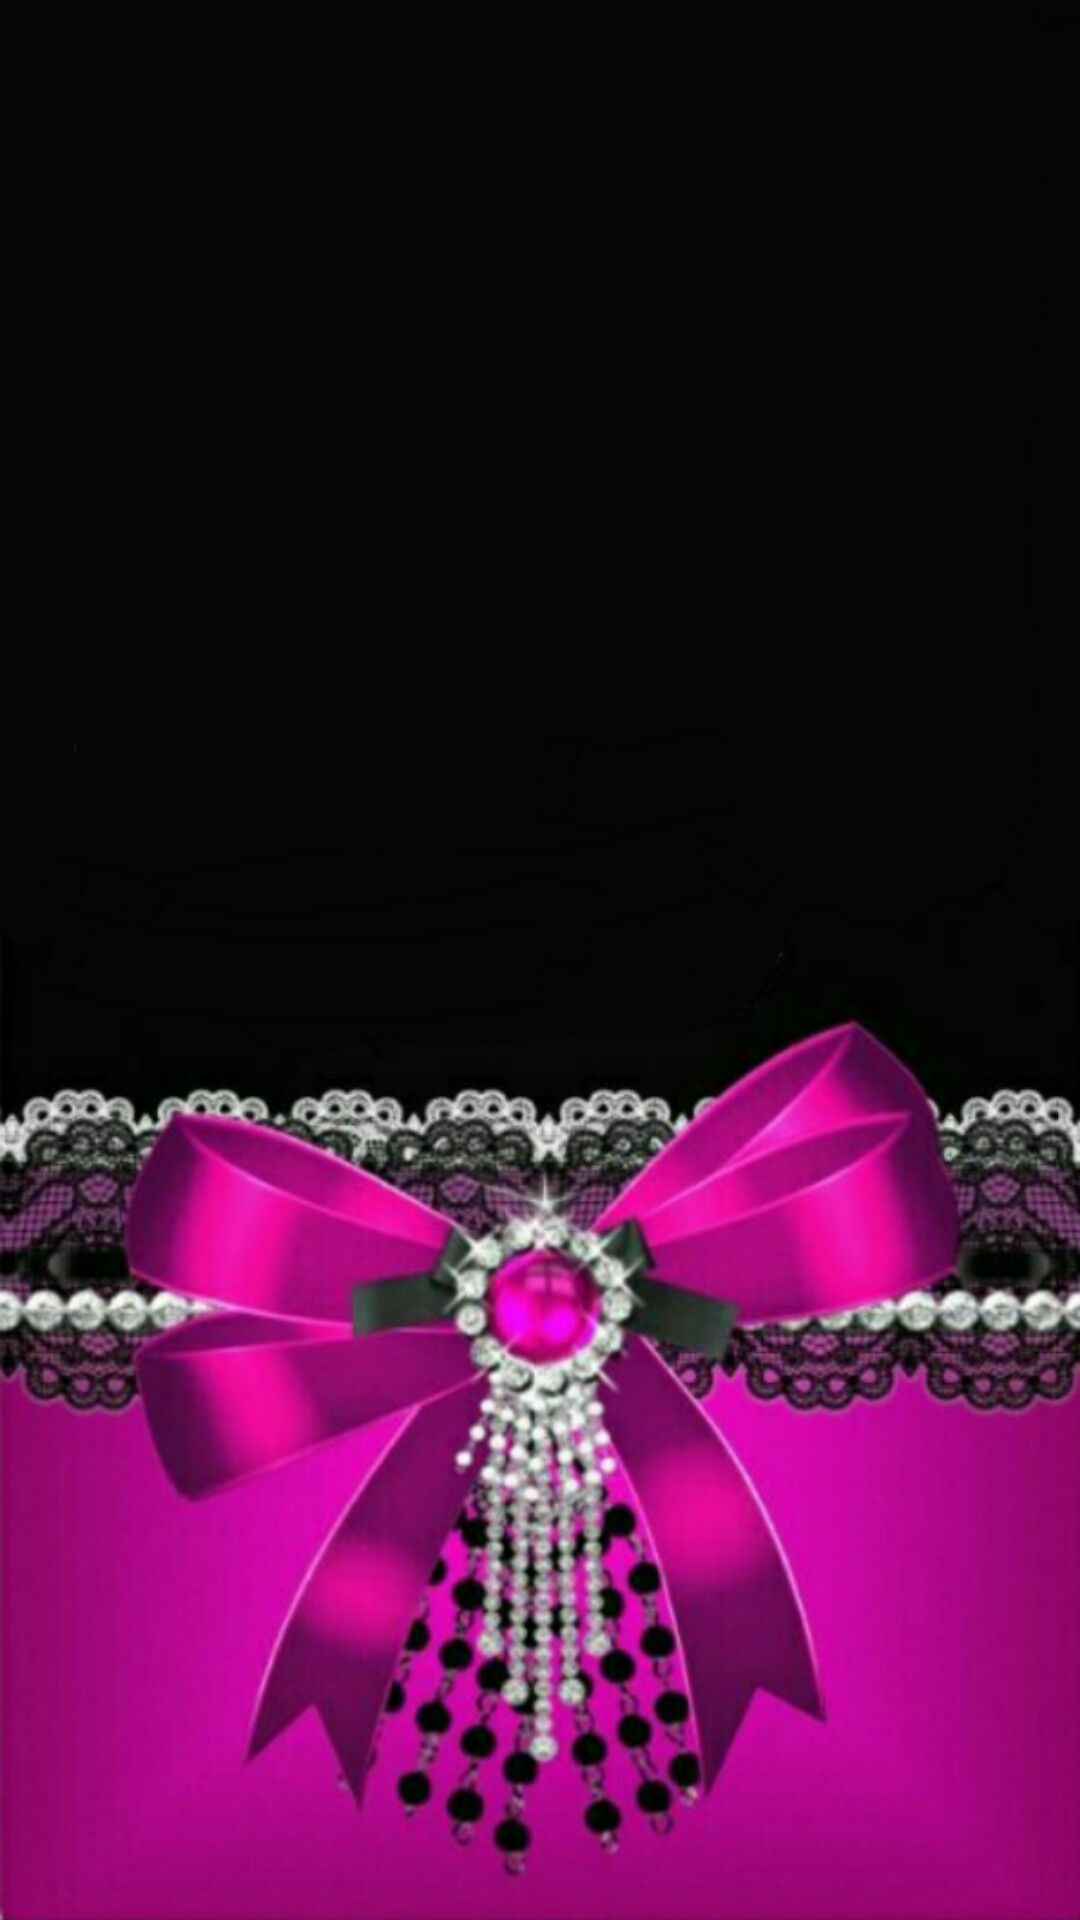 1080x1920 Black with Pink Bow Wallpaper.By Artist Unknown.